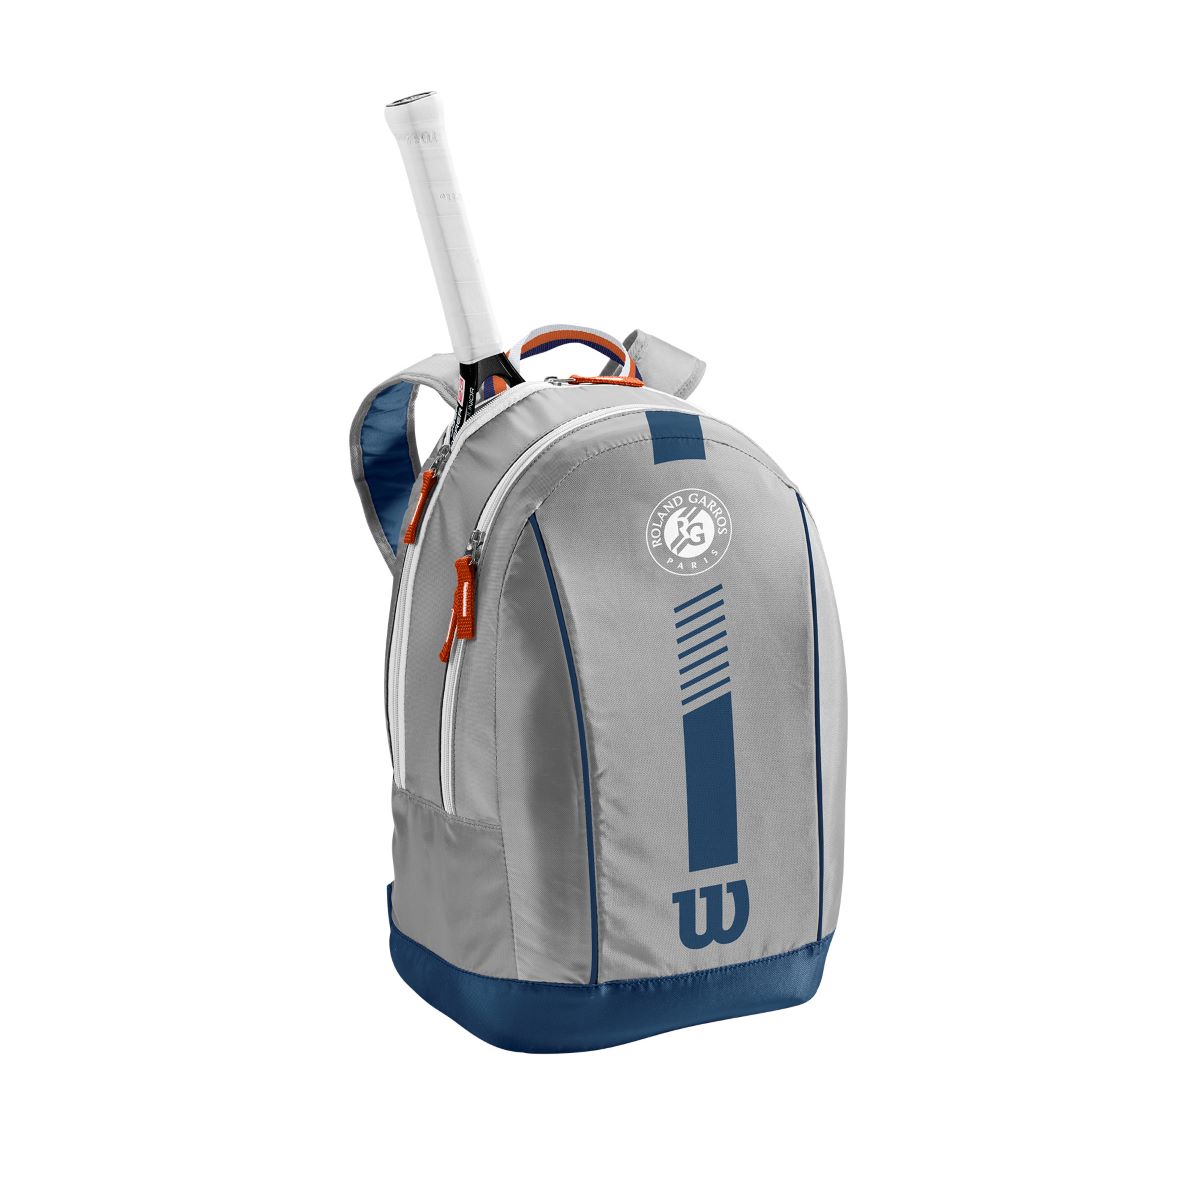 WR8019501_1_Roland_Garros_JR_BACKPACK_GY_NA_CLAY.png.high-res